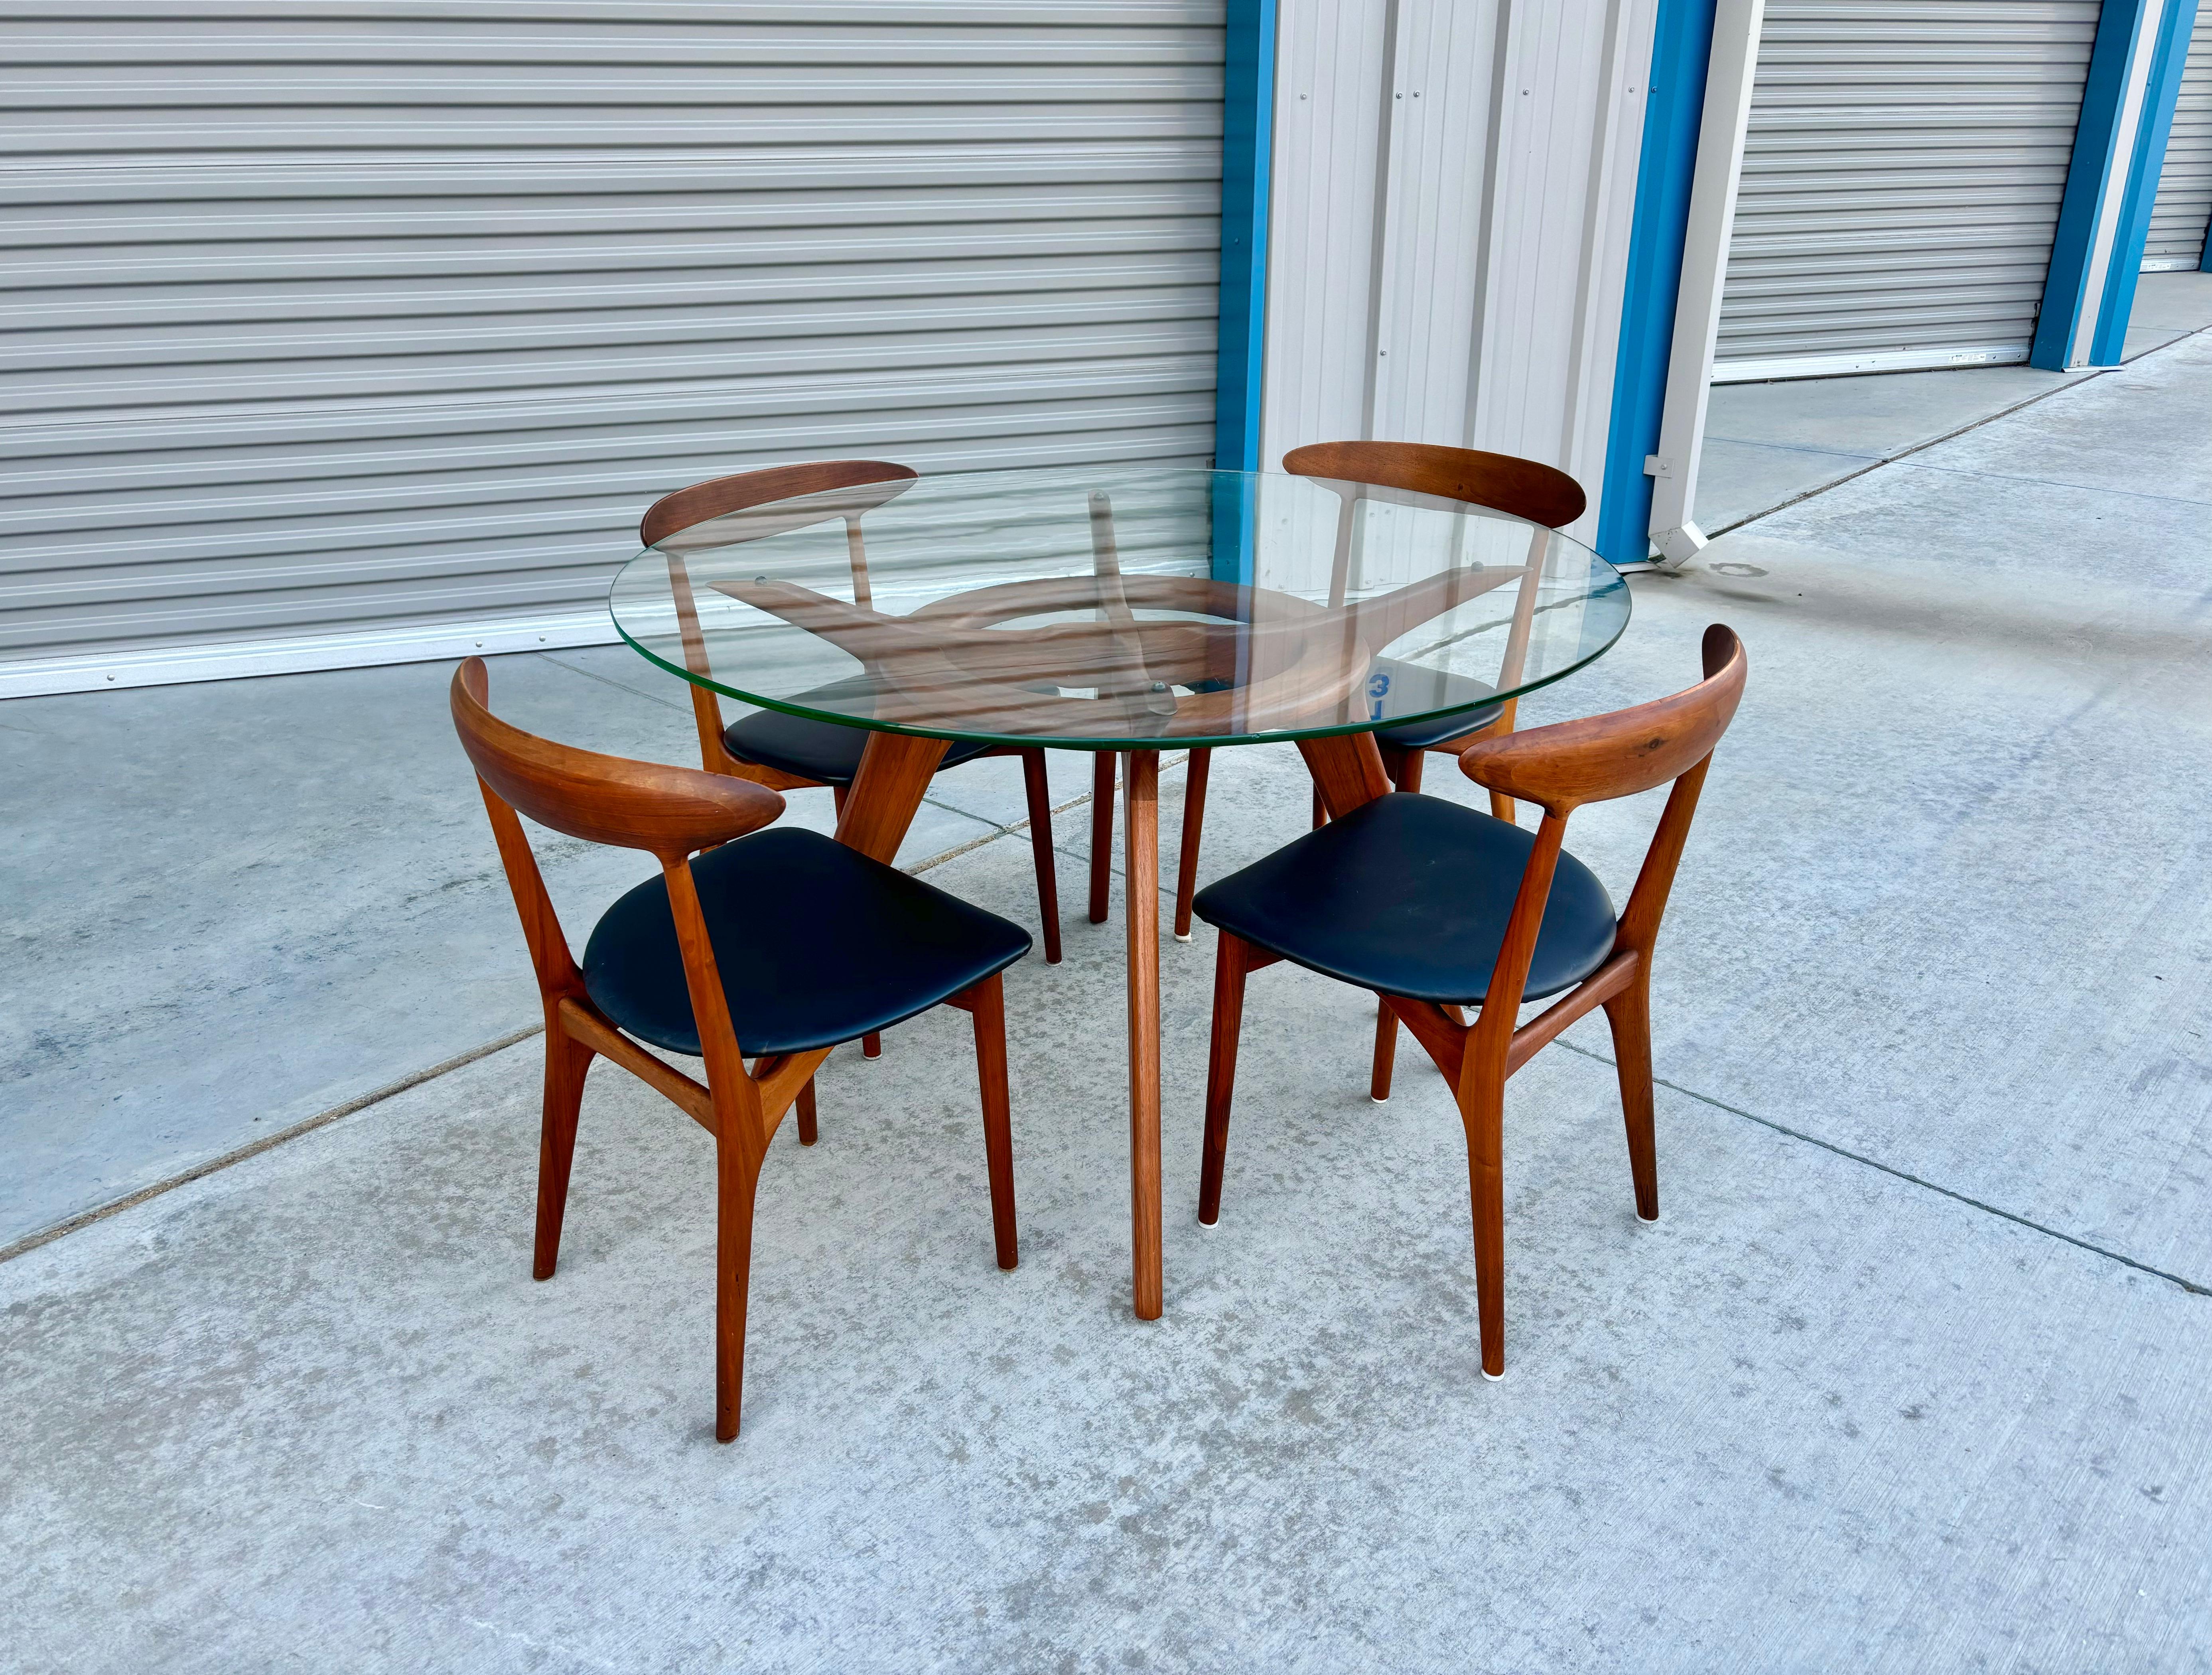 This beautiful dining room set features four teak chairs designed by Kurt Ostervig and manufactured by Brande Møbelindustri. The set also has a round glass top that gracefully sits on a solid walnut base. They were designed by Adrian Pearsall and